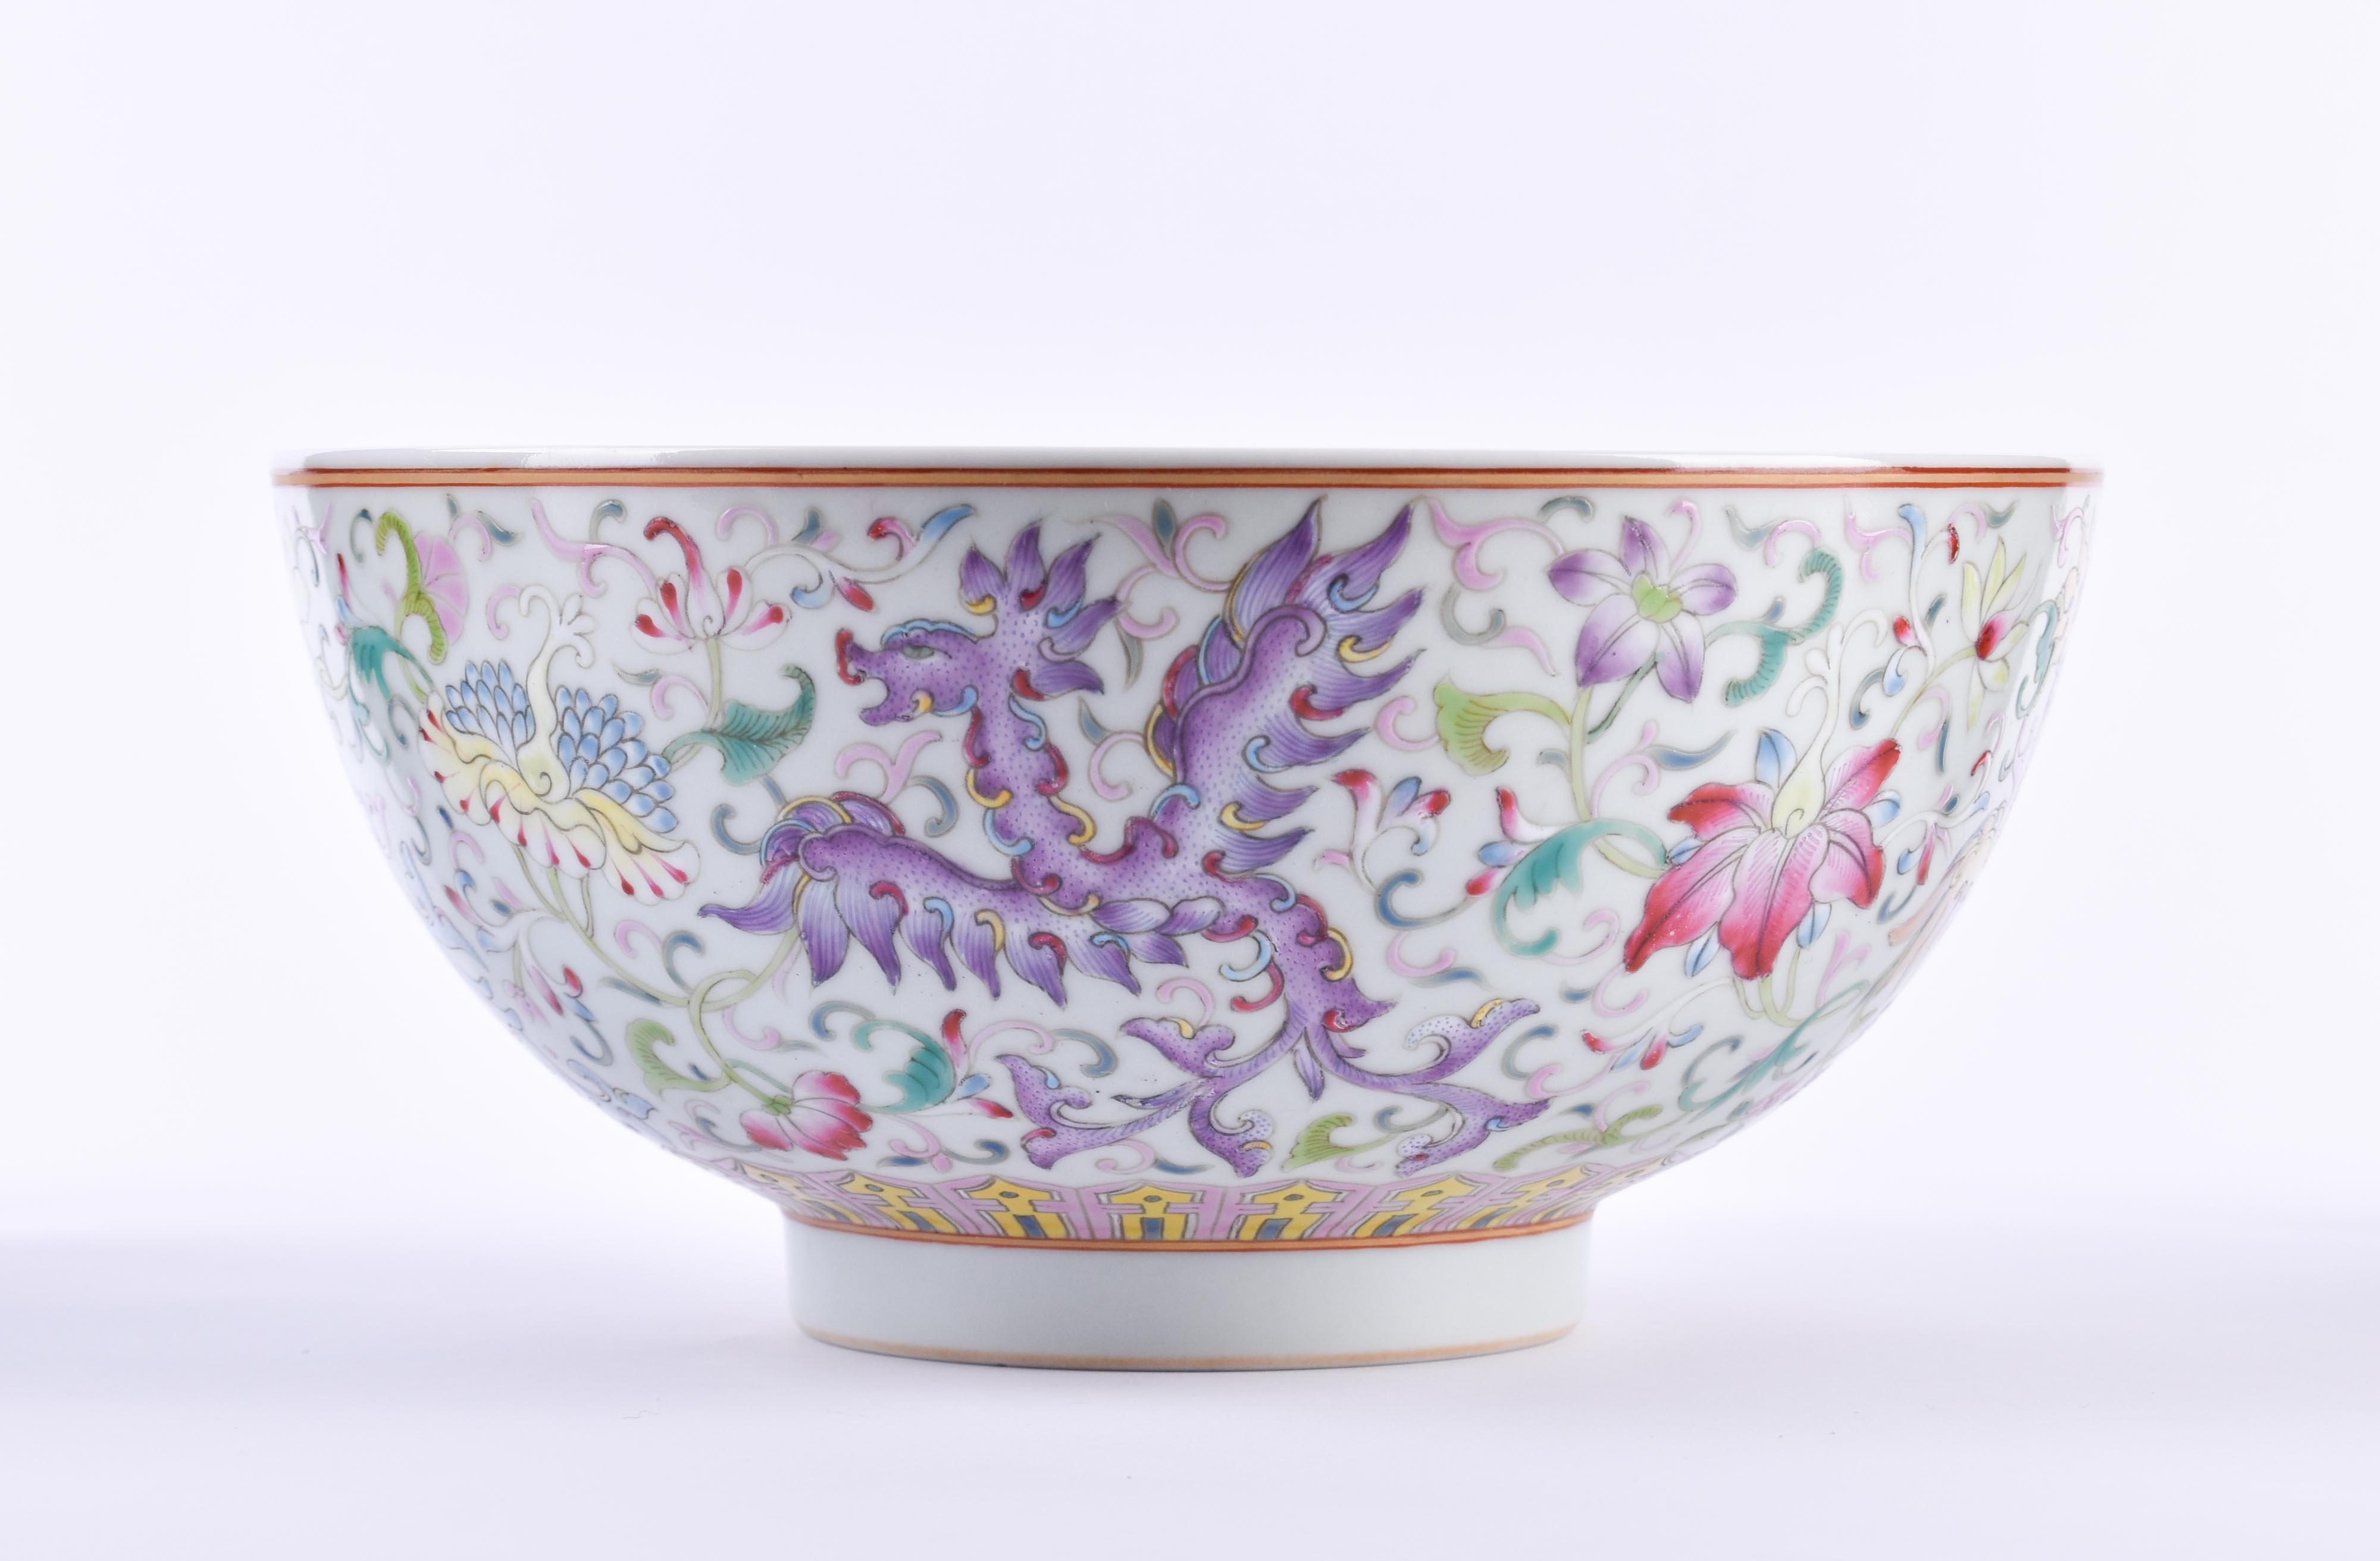  Famille Rose bowl China Qing dynasty - Image 6 of 10